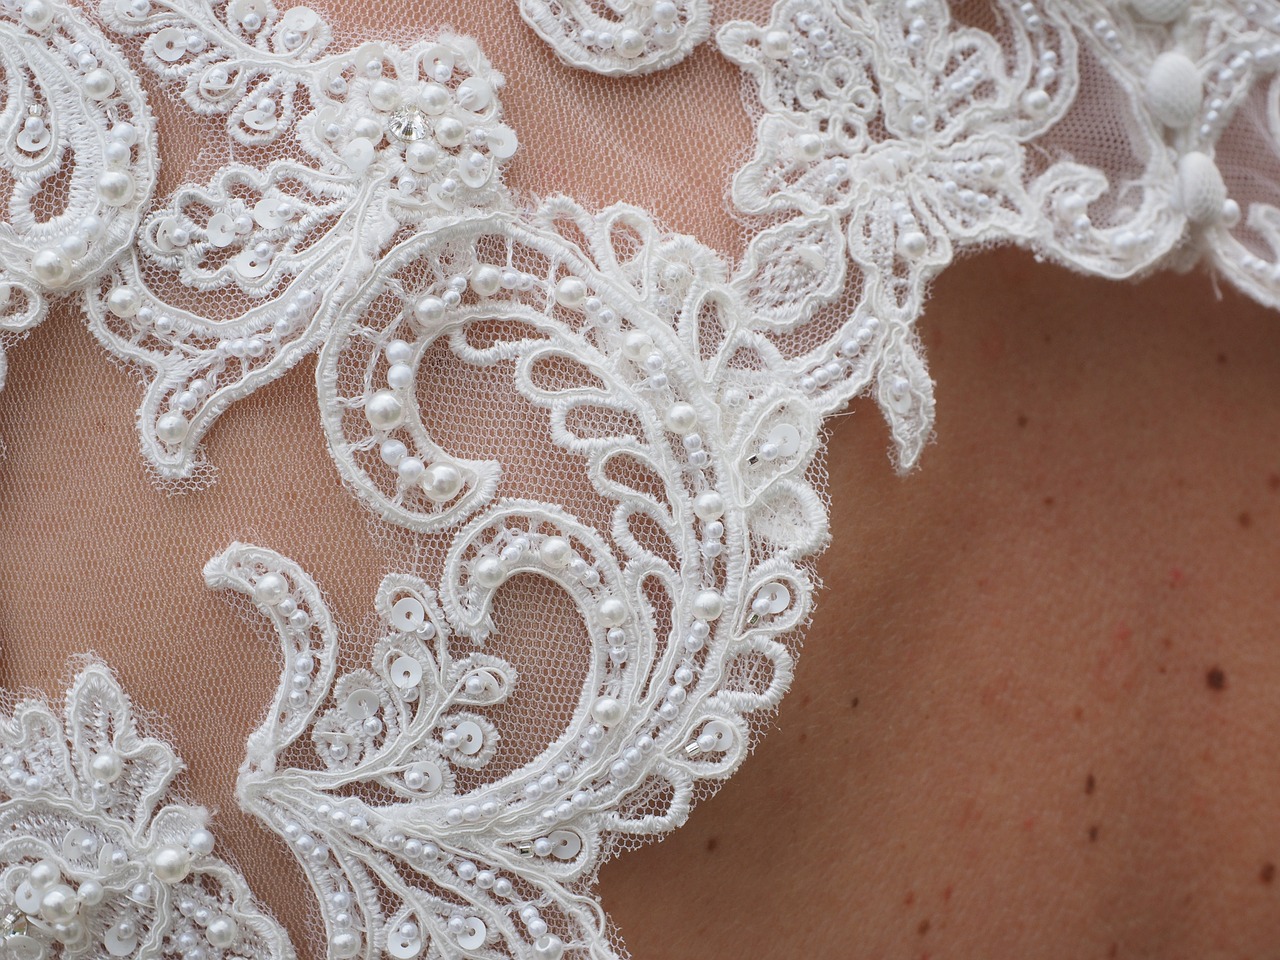 Close up of bridal gown material on a bride's shoulder.